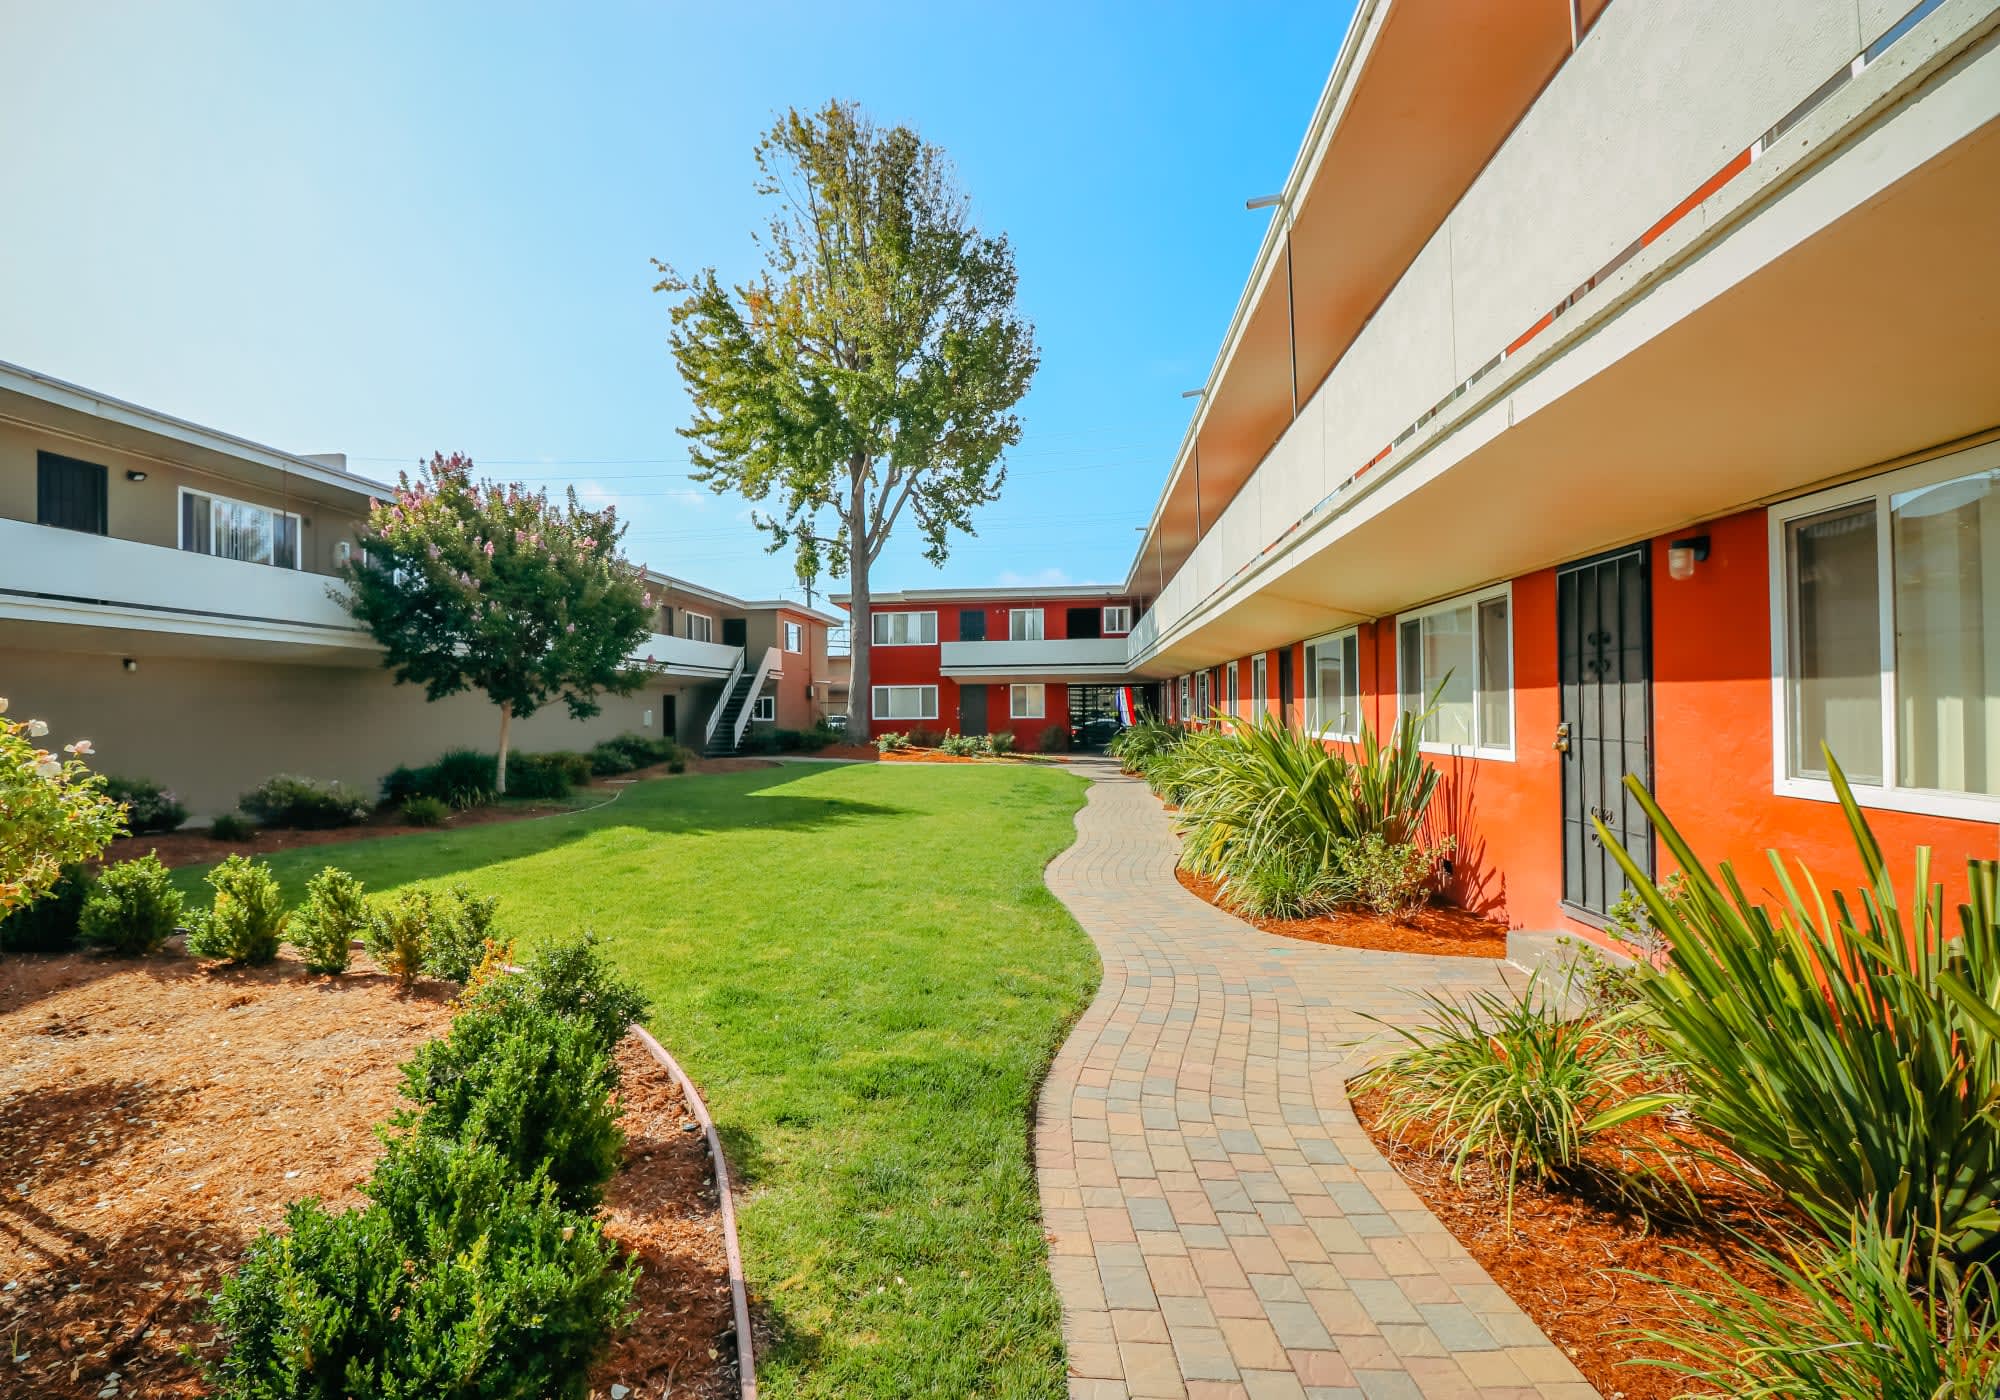 Accessibility Statement at Garden Court Apartments in Alameda, California